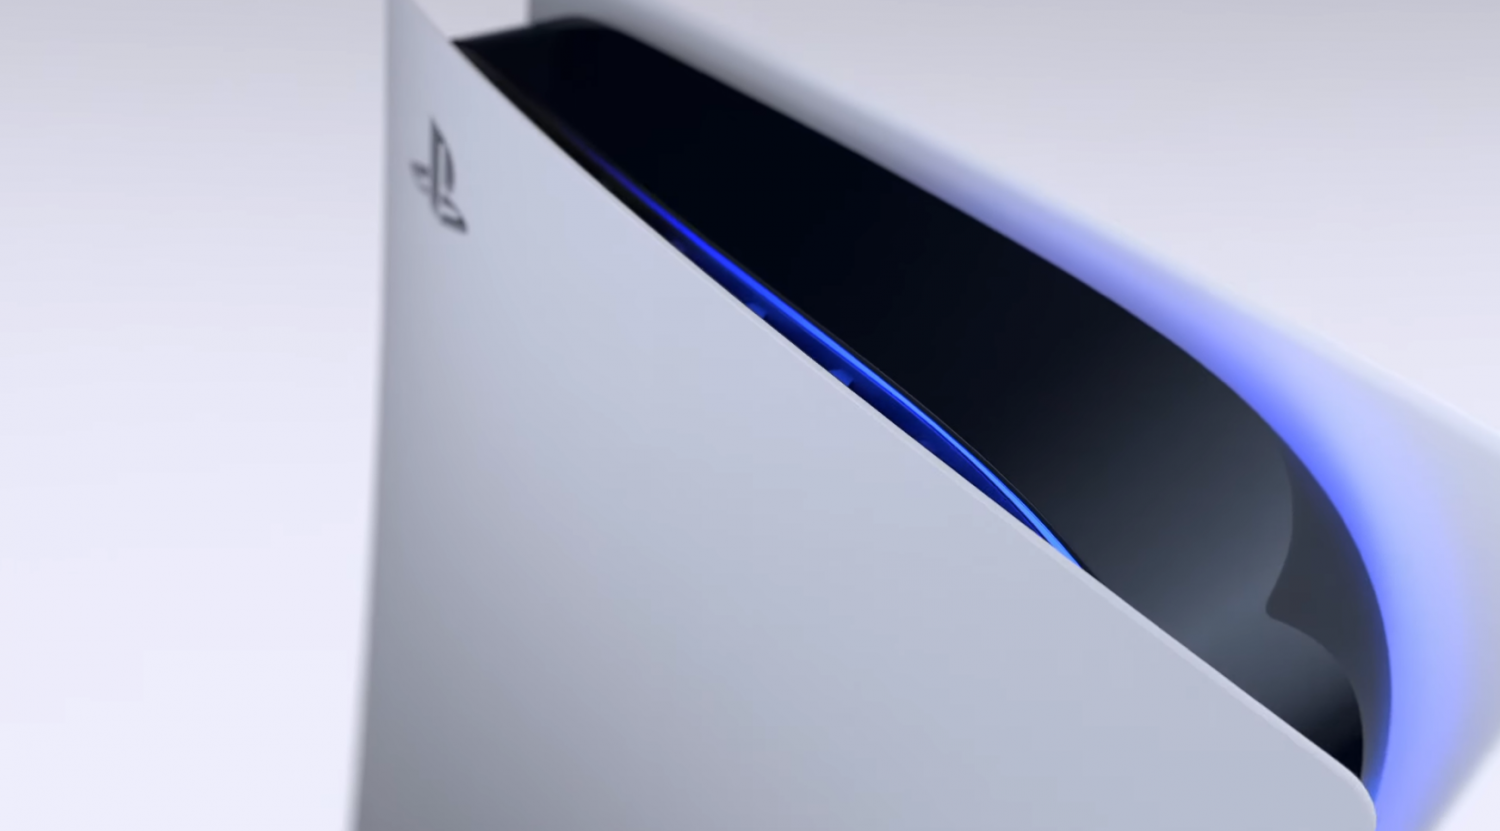 PlayStation 5 price: All the that PS5 may cost $499